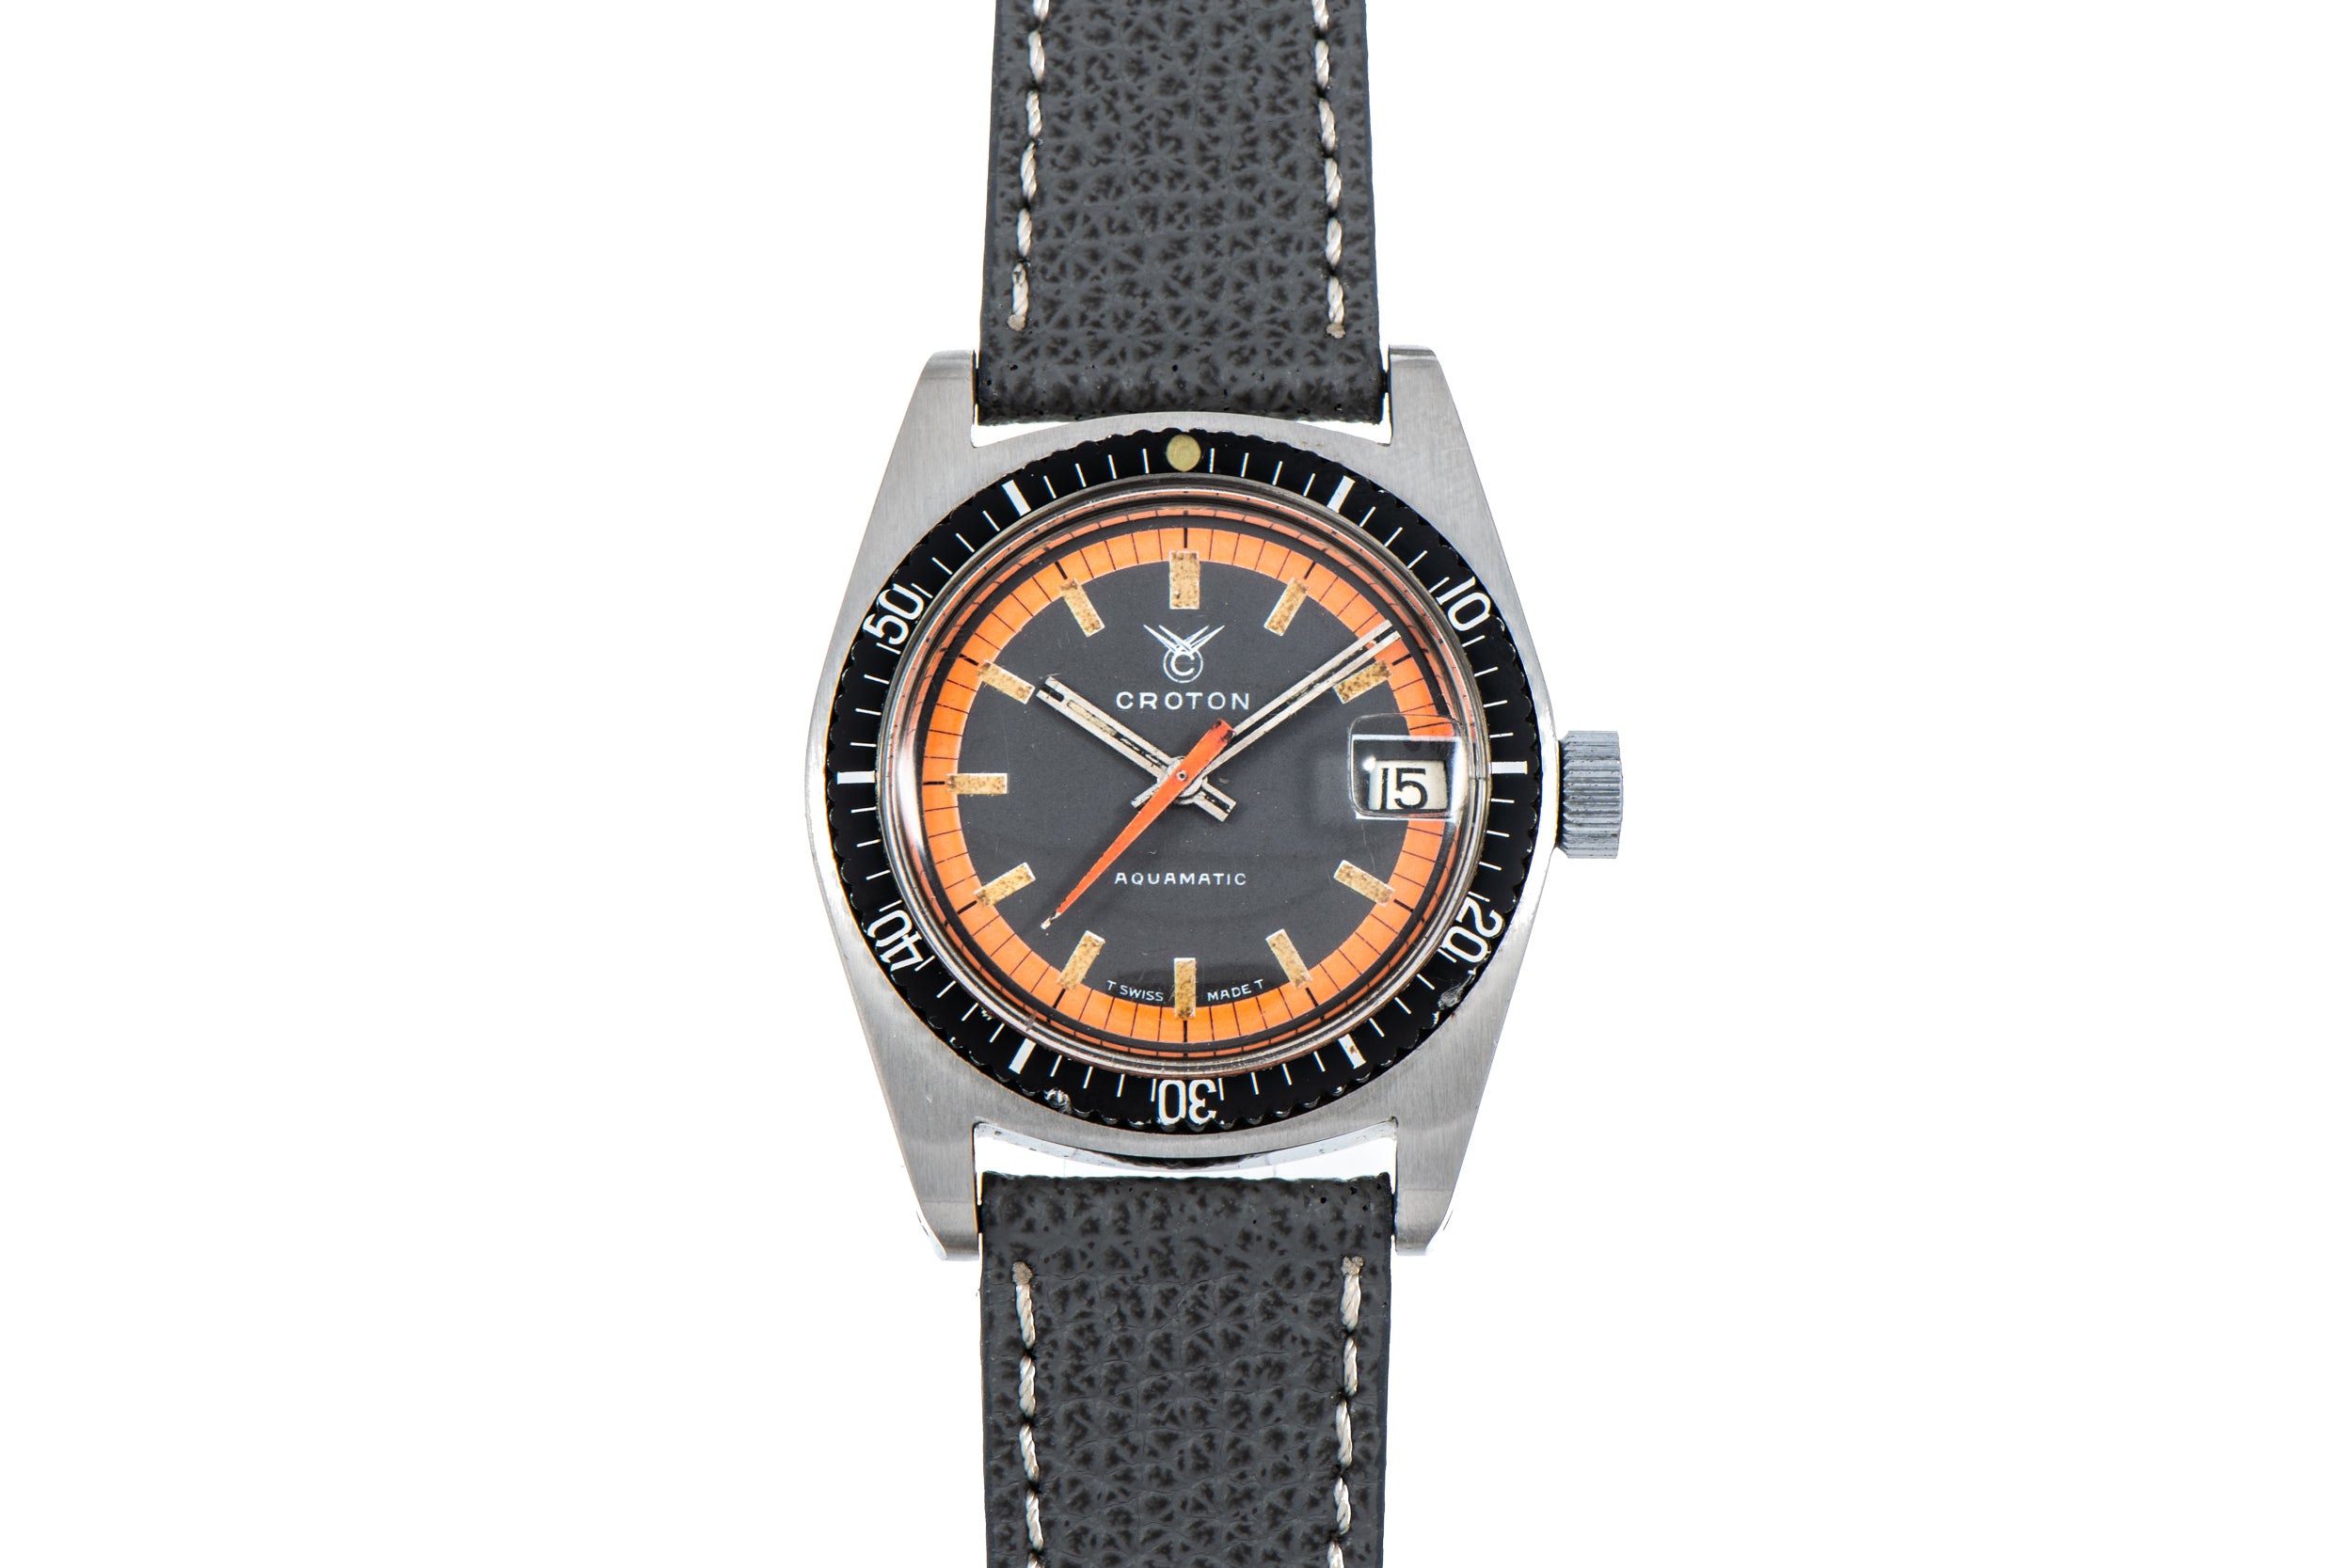 Shop Vintage Croton Nivada Grenchen Aquamatic Watch – SECOND HAND HOROLOGY